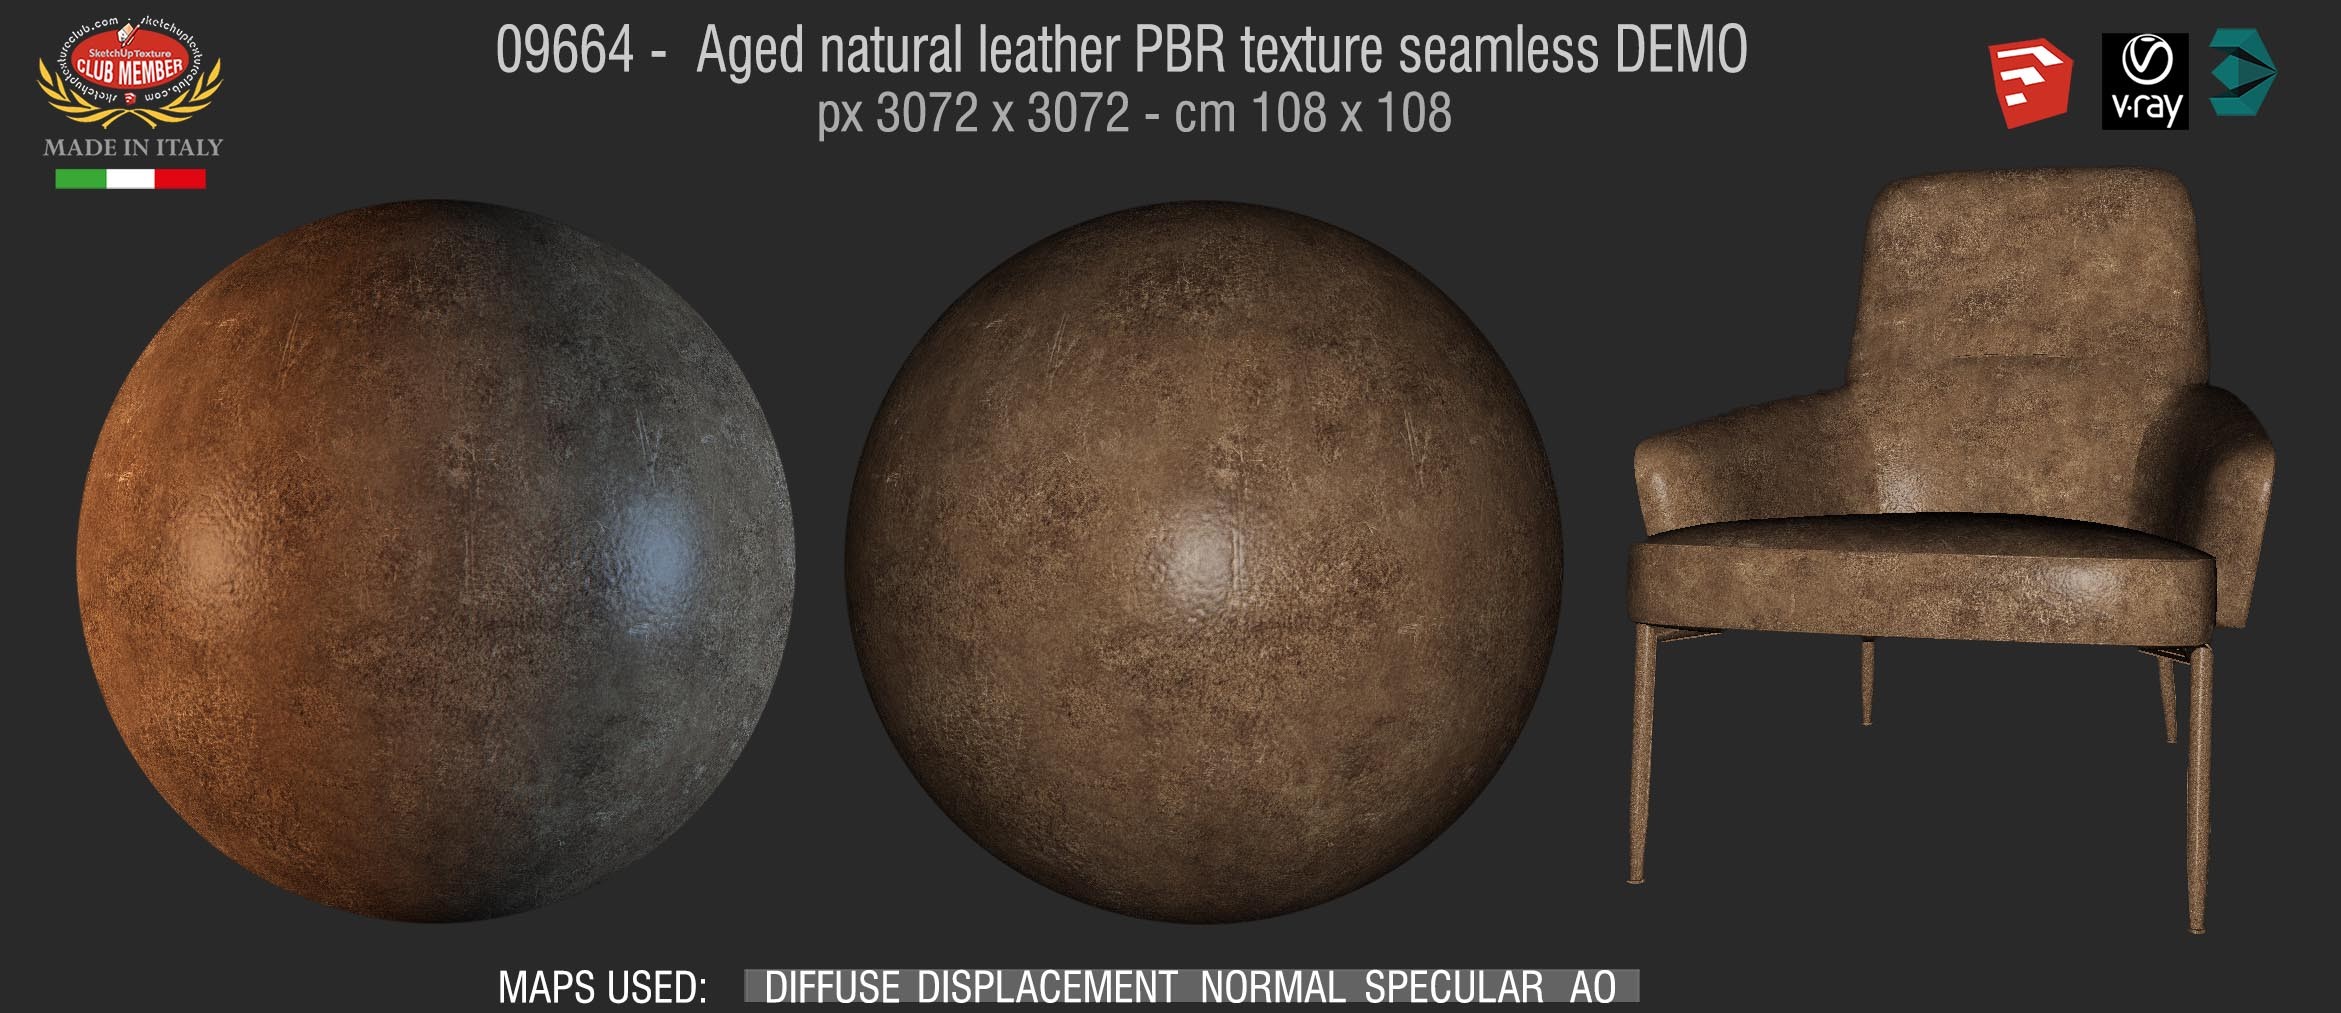 09664 Aged natural leather PBR texture seamless DEMO